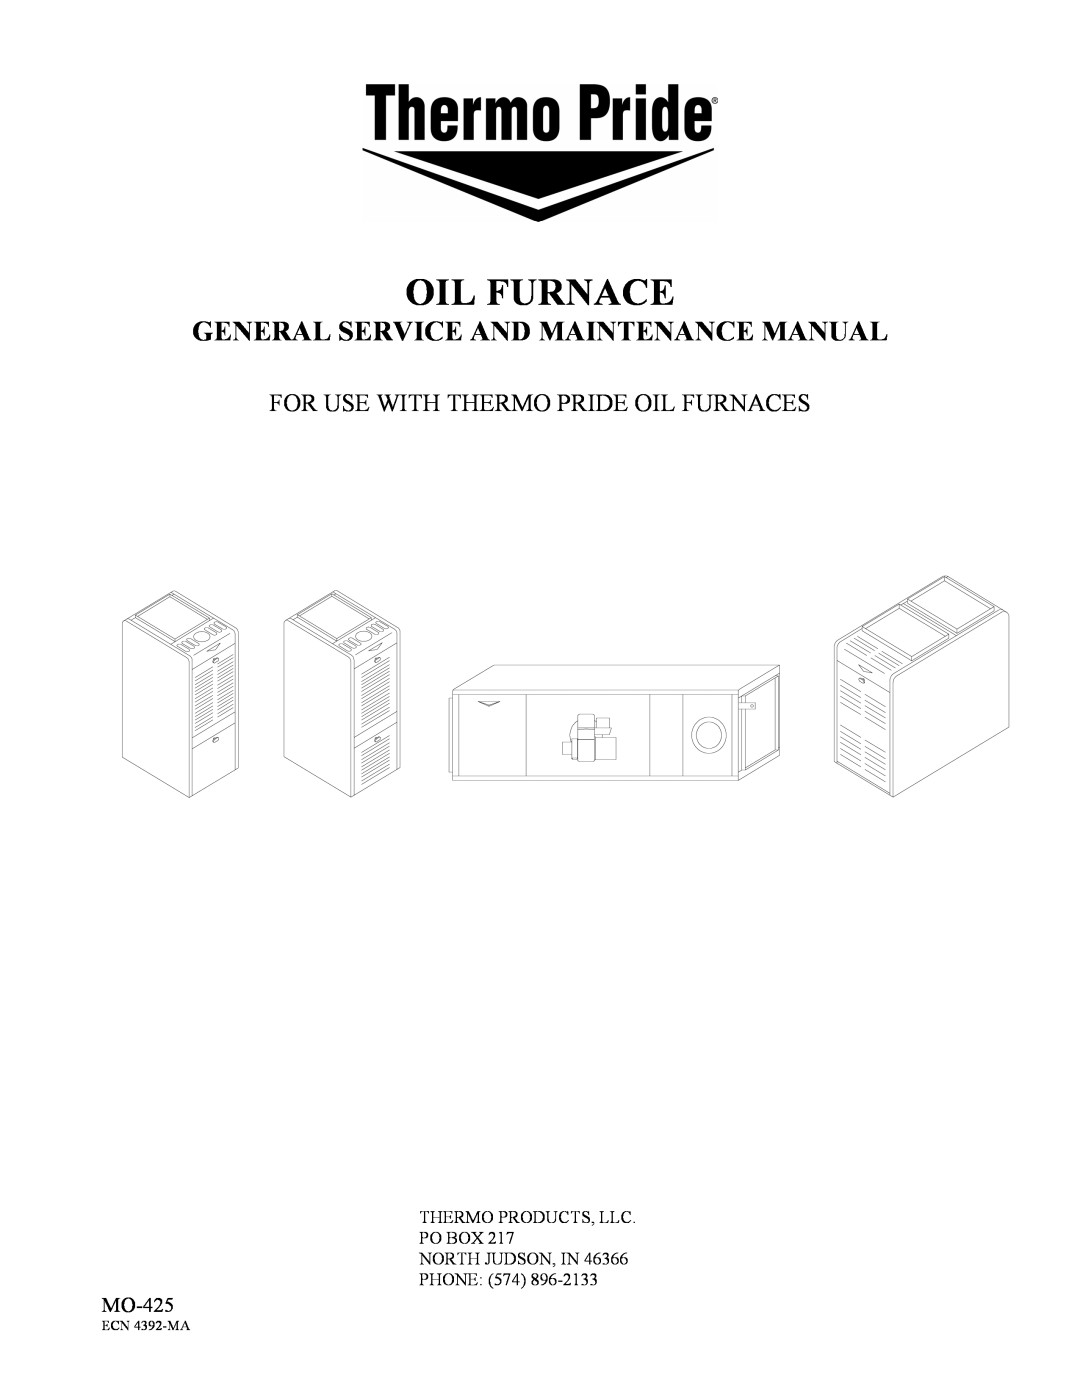 Thermo Products MO-425 manual General Service And Maintenance Manual, For Use With Thermo Pride Oil Furnaces 